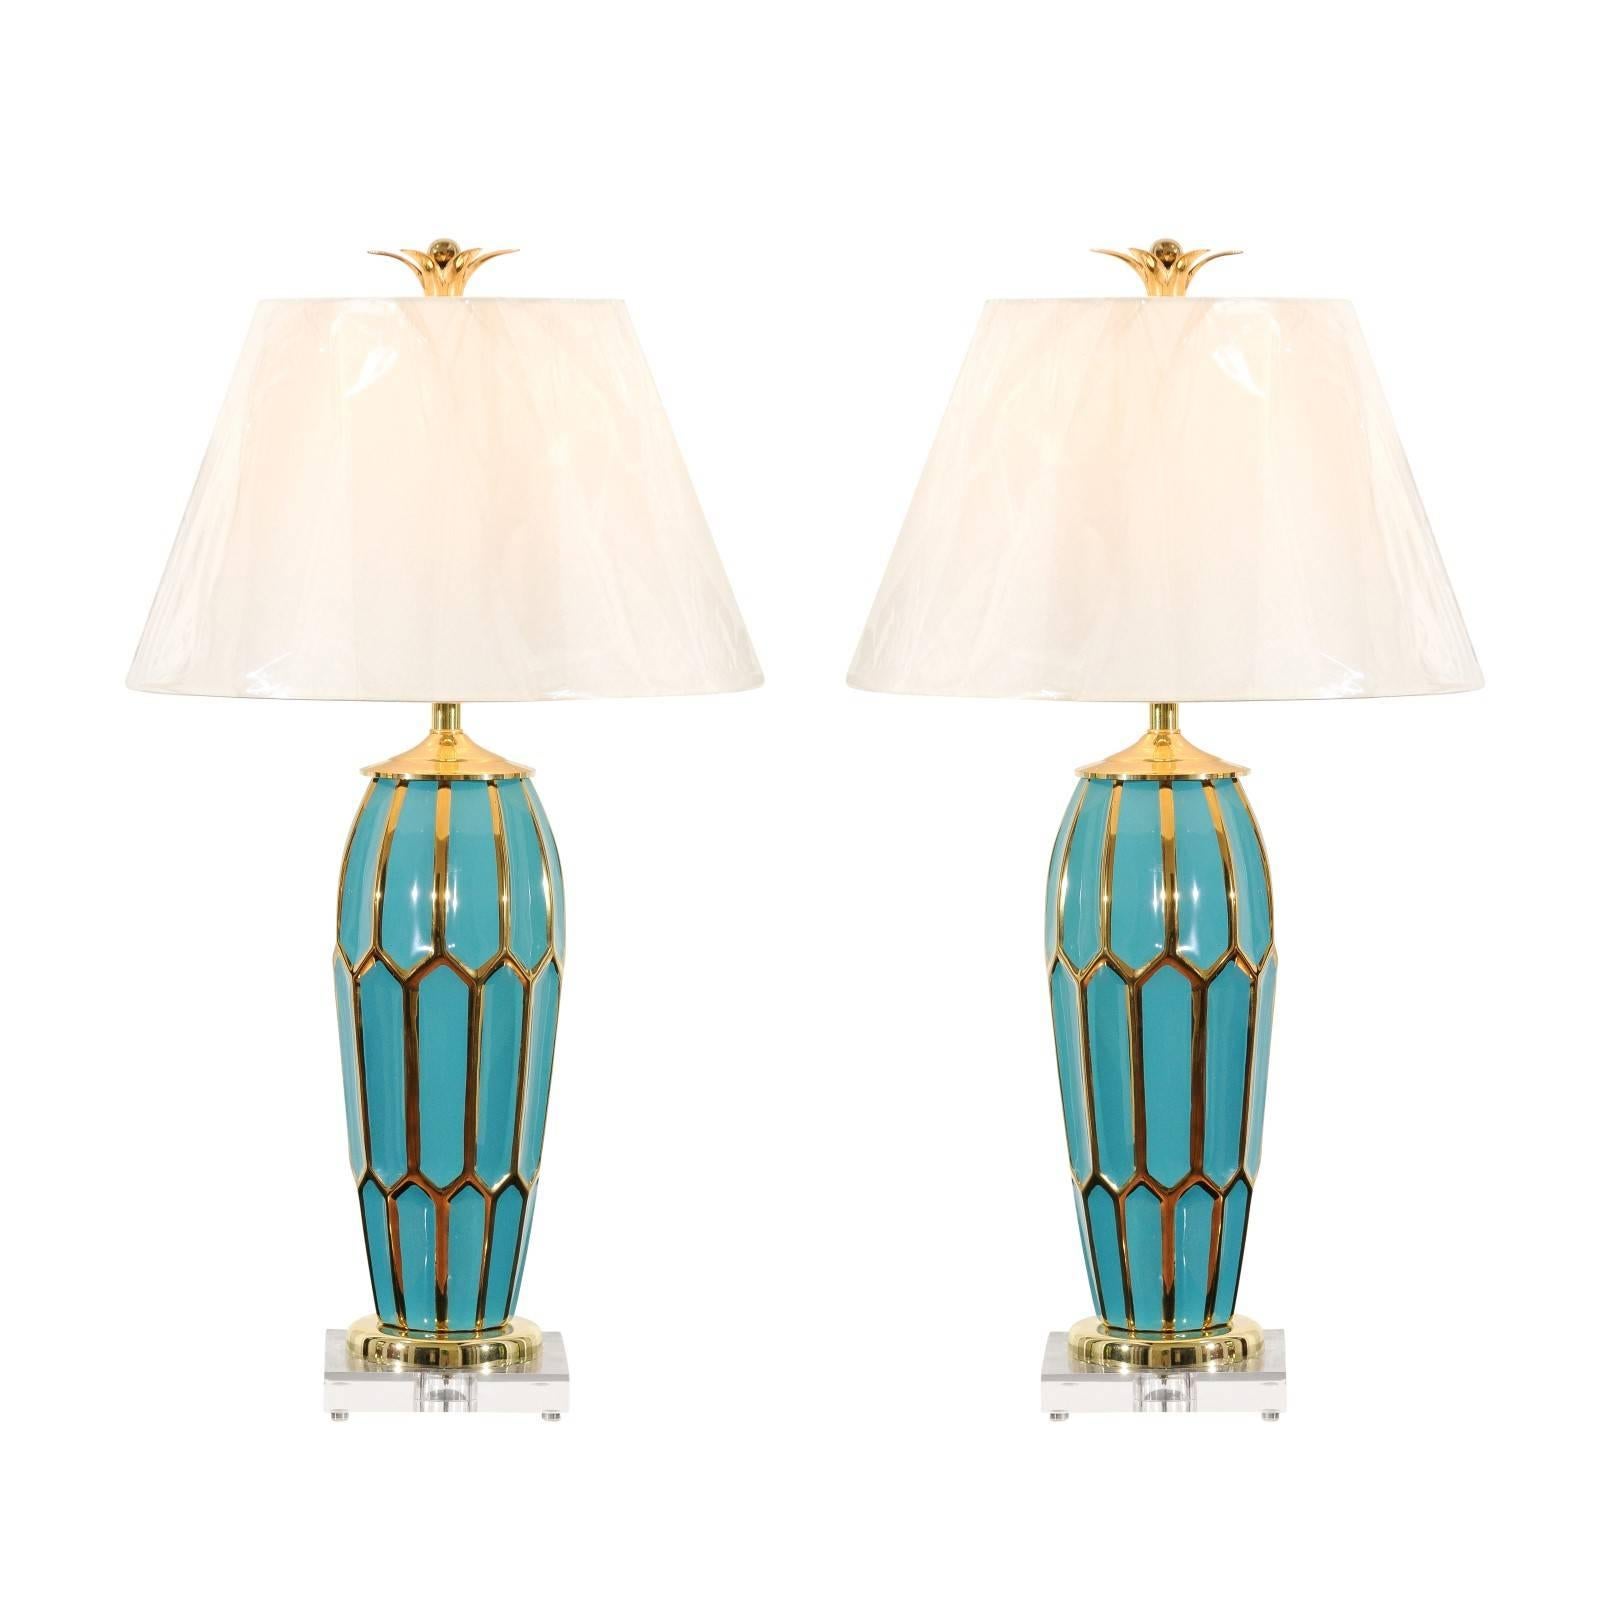 Striking Pair of Custom Ceramic Lamps in Turquoise and Gold For Sale